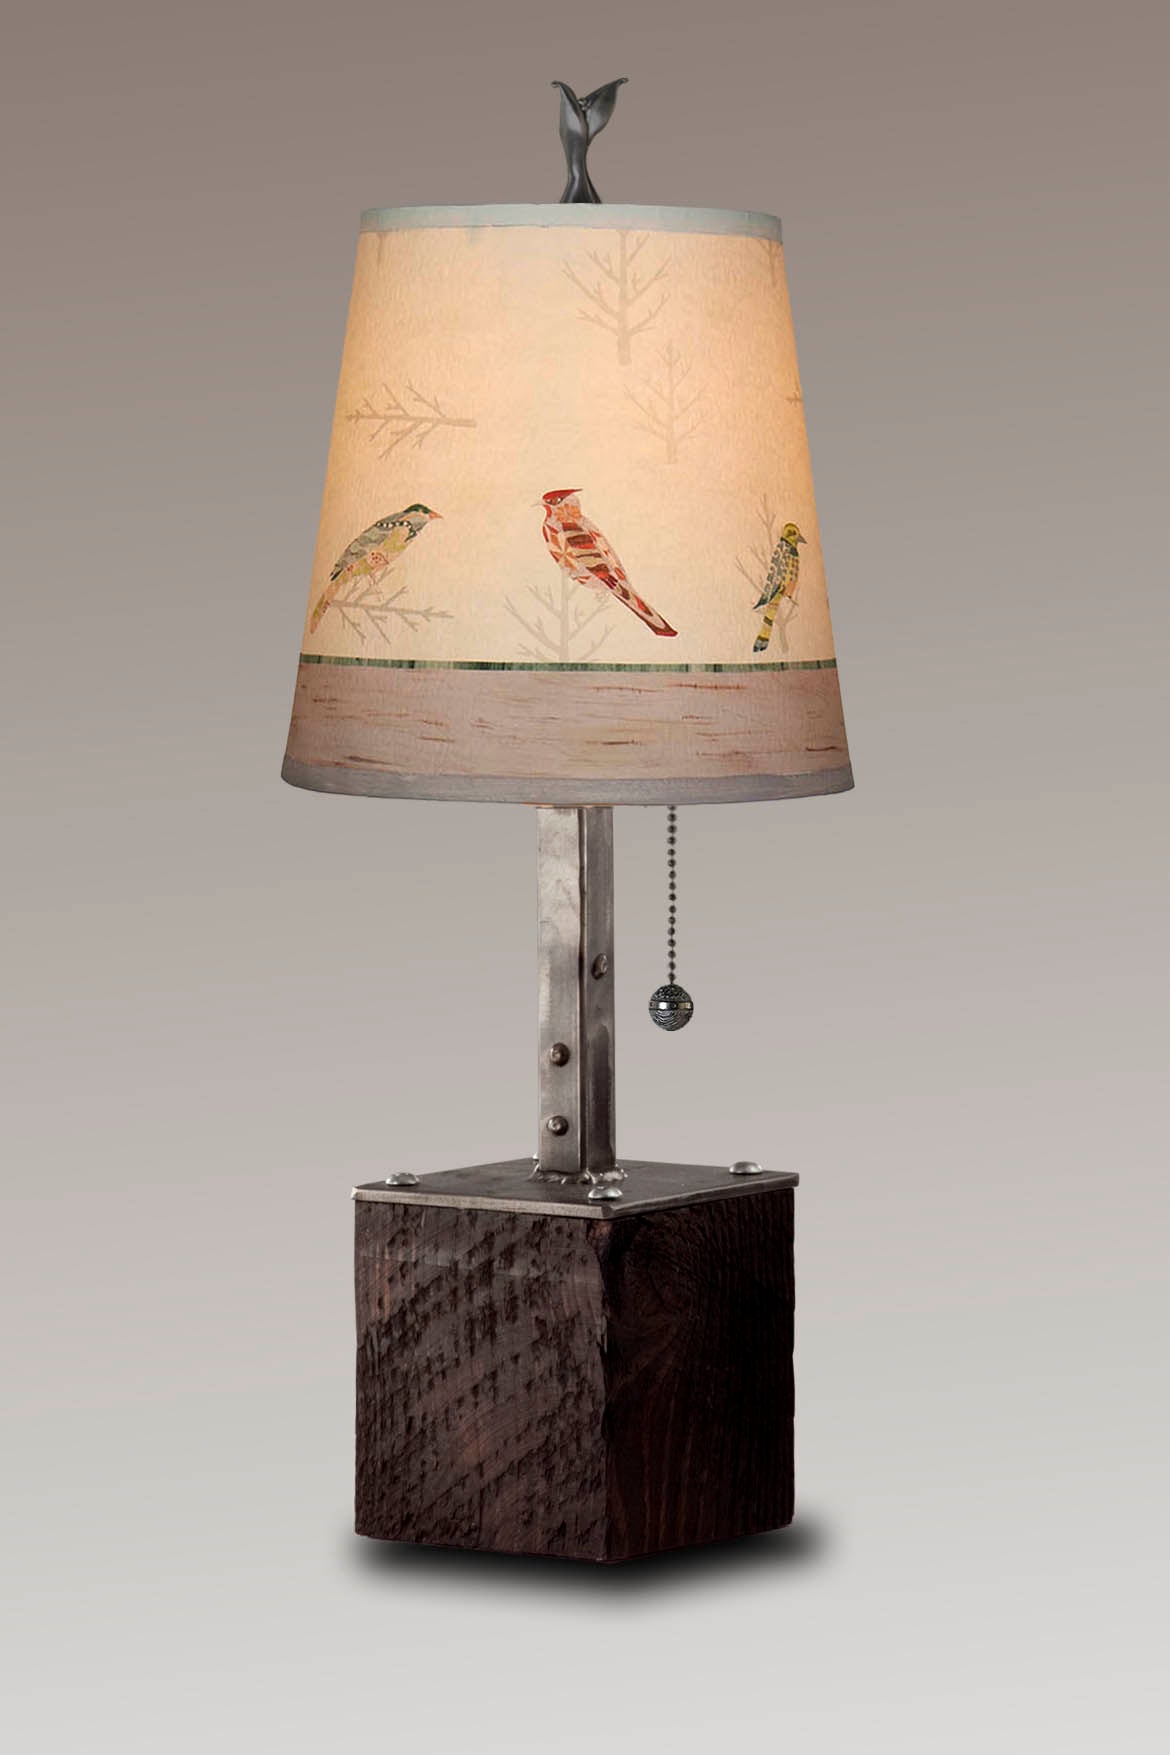 Janna Ugone & Co Table Lamp Steel Table Lamp on Reclaimed Wood with Small Drum Shade in Bird Friends